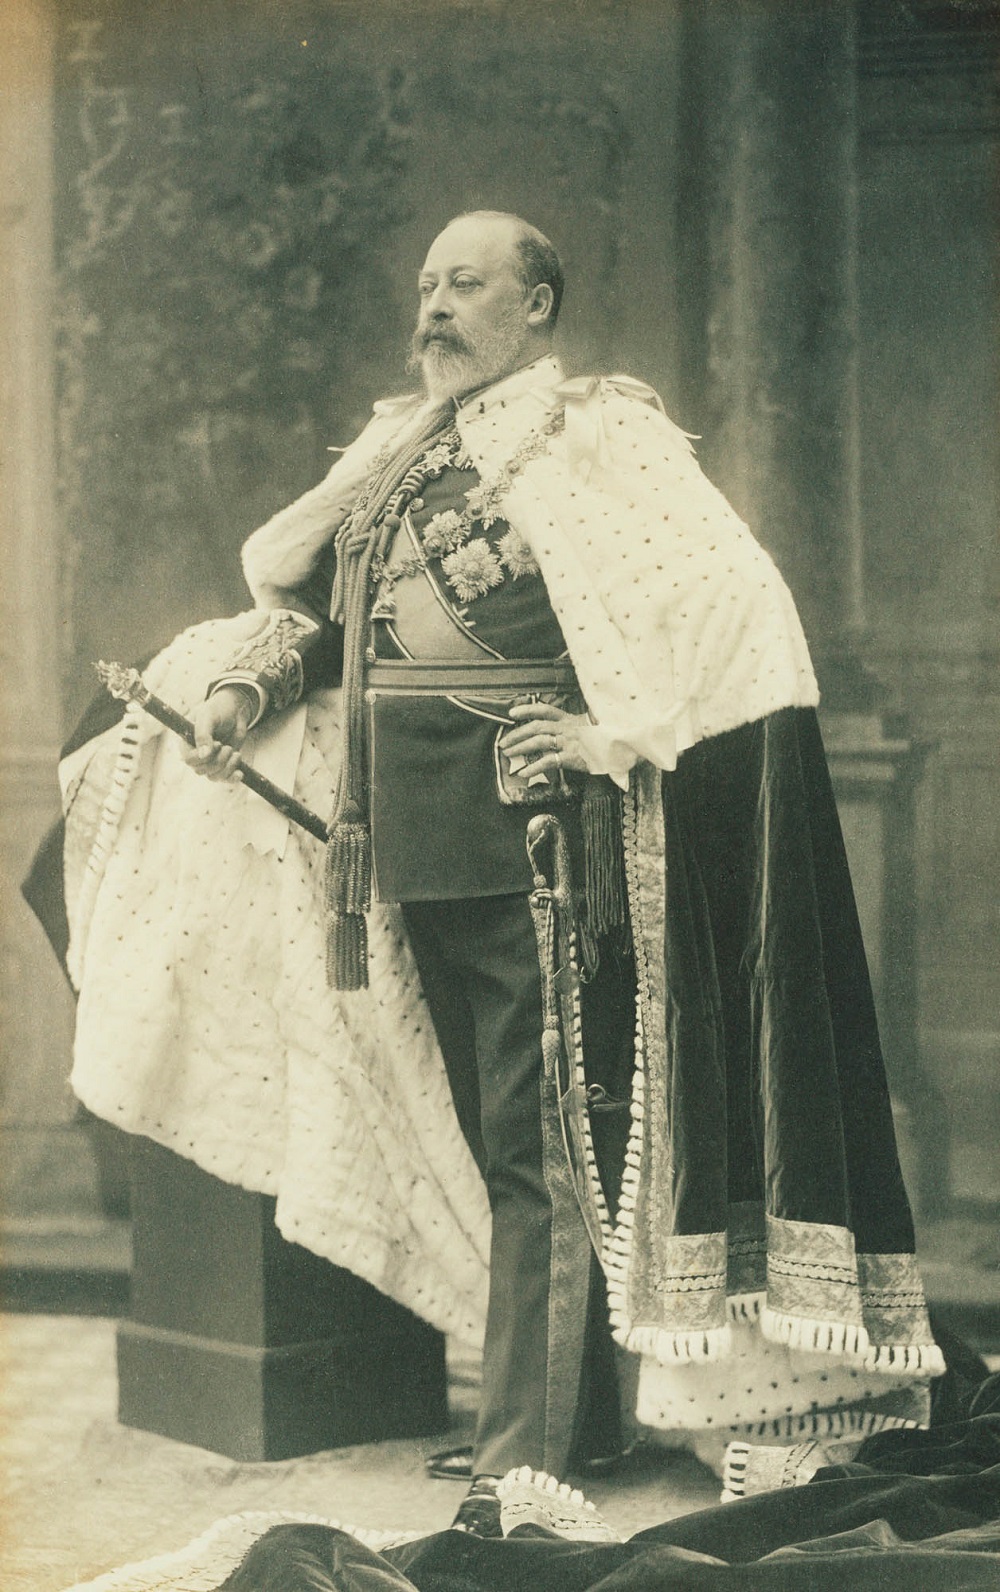 Photo of King Edward VII by Downey